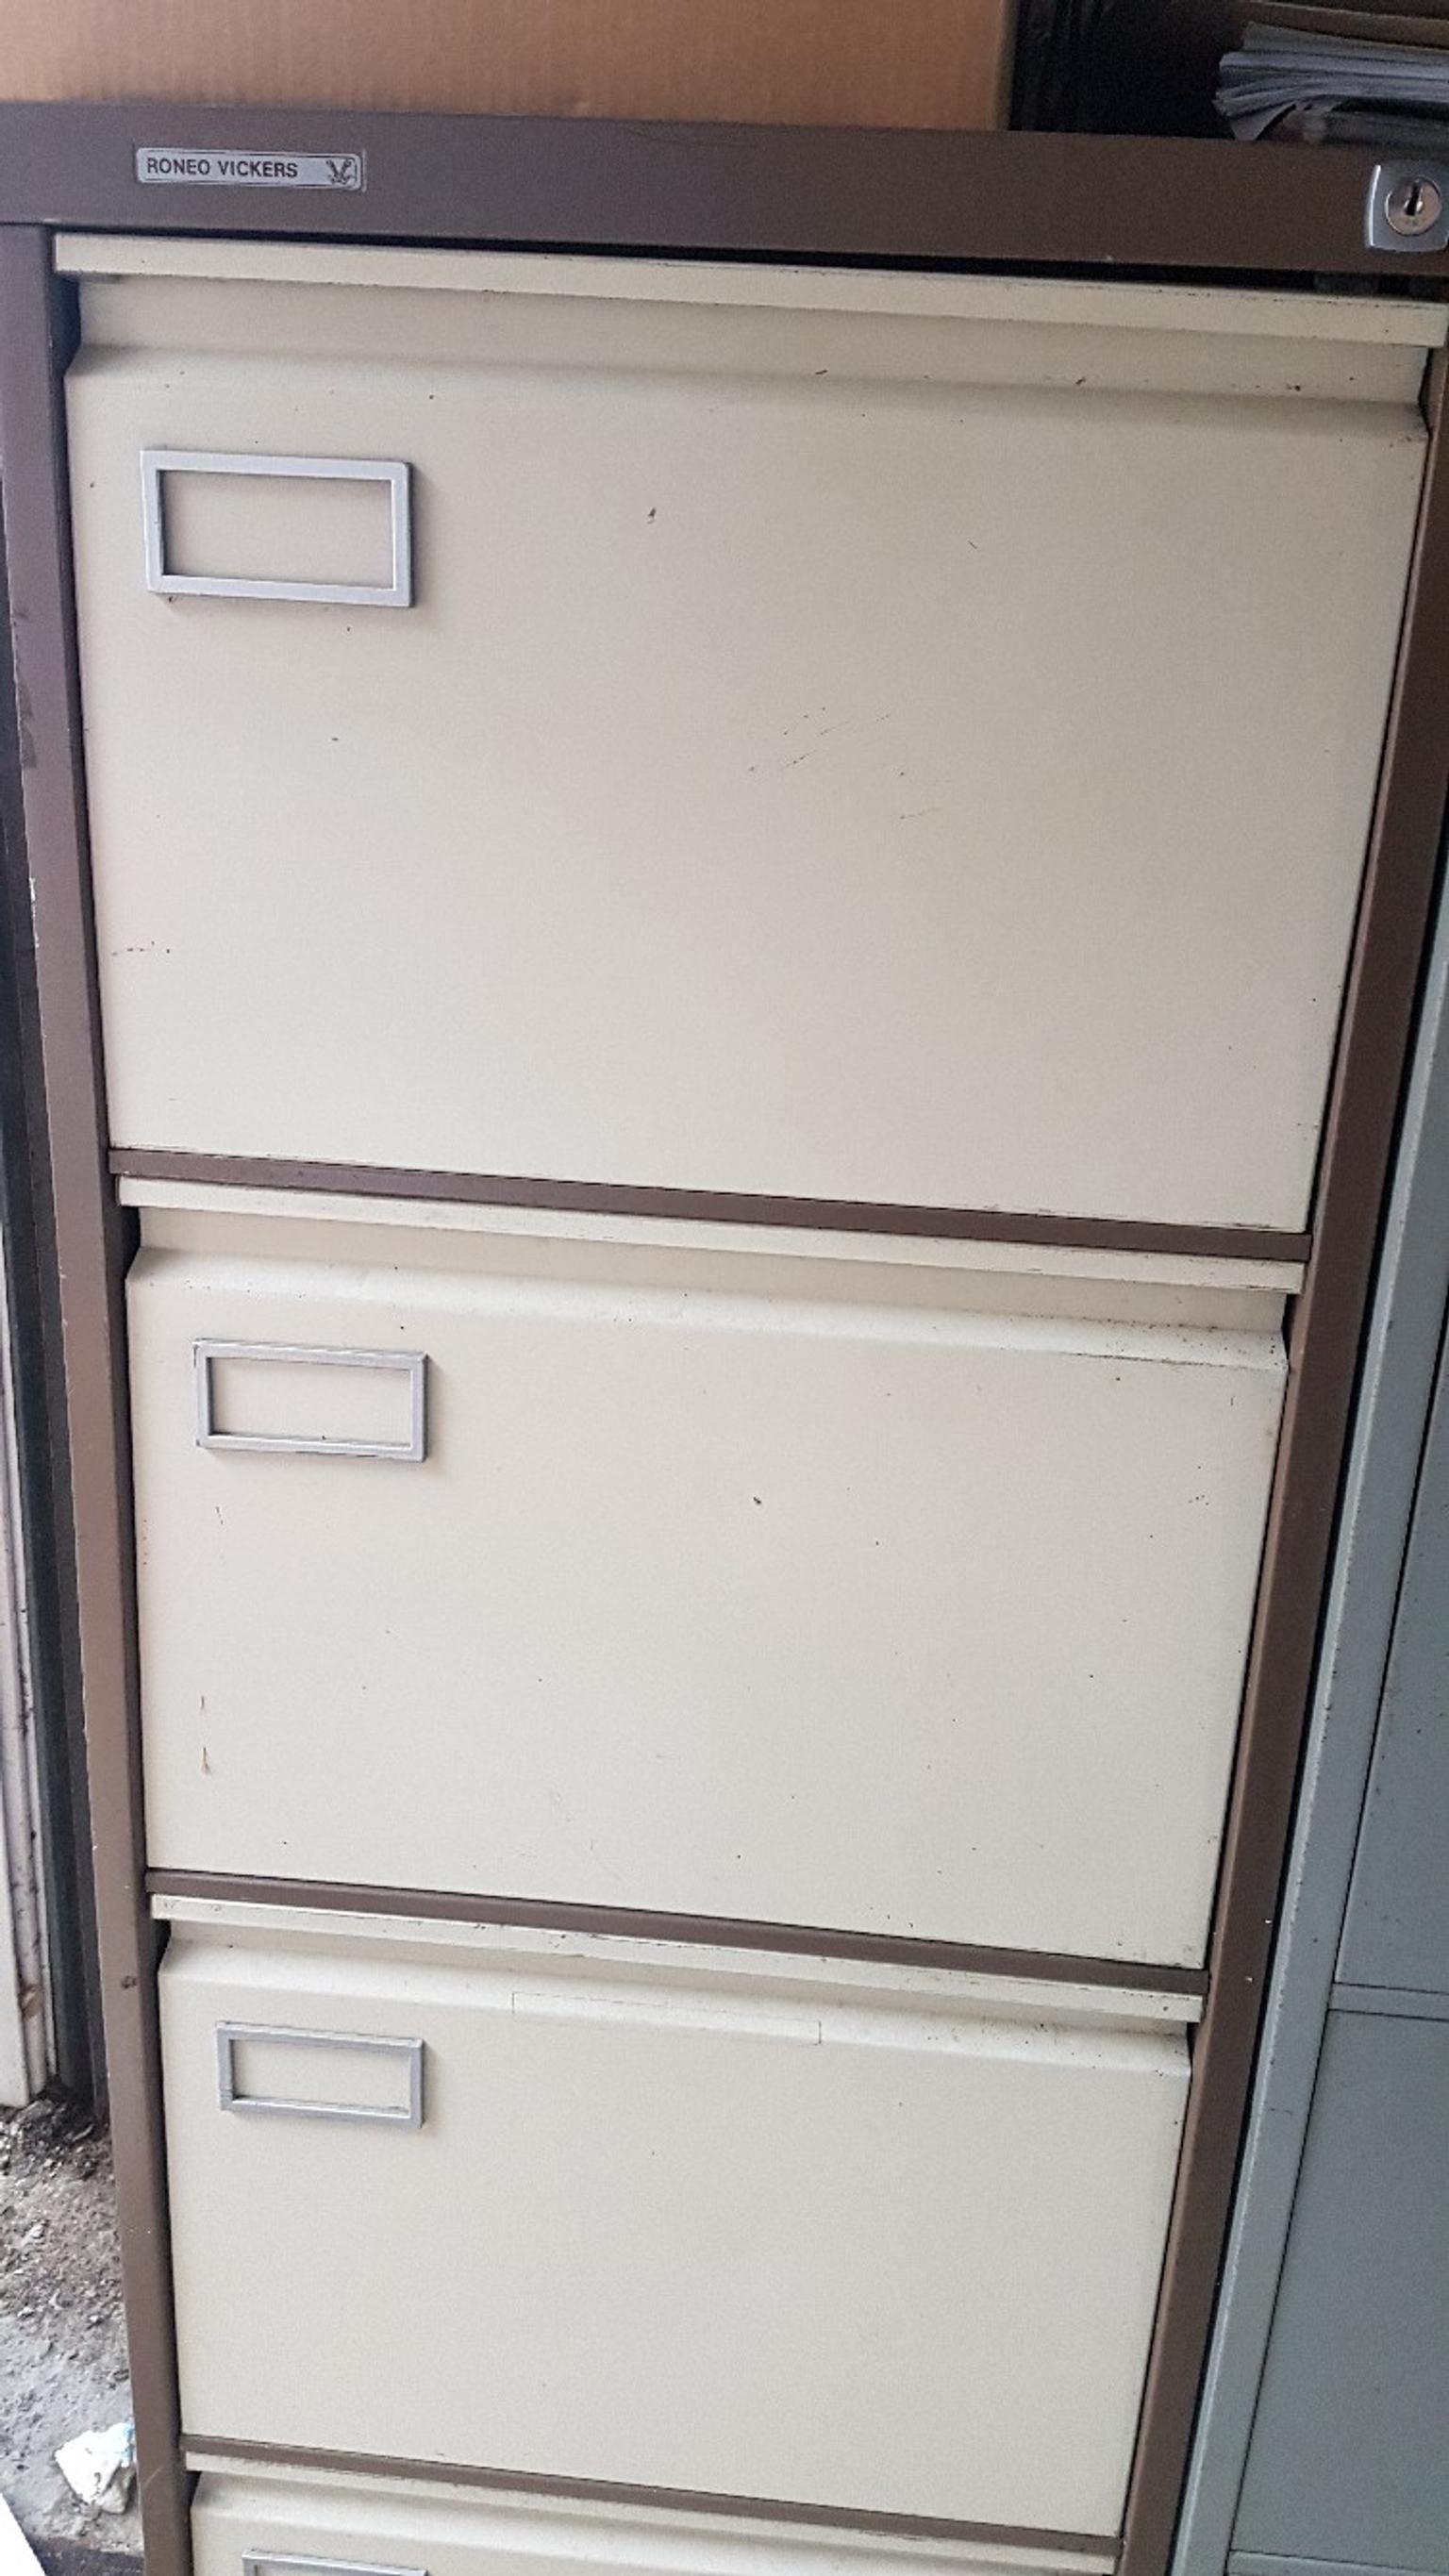 2 X Filing Cabinets Good Condition No Key In Rm12 London Fur